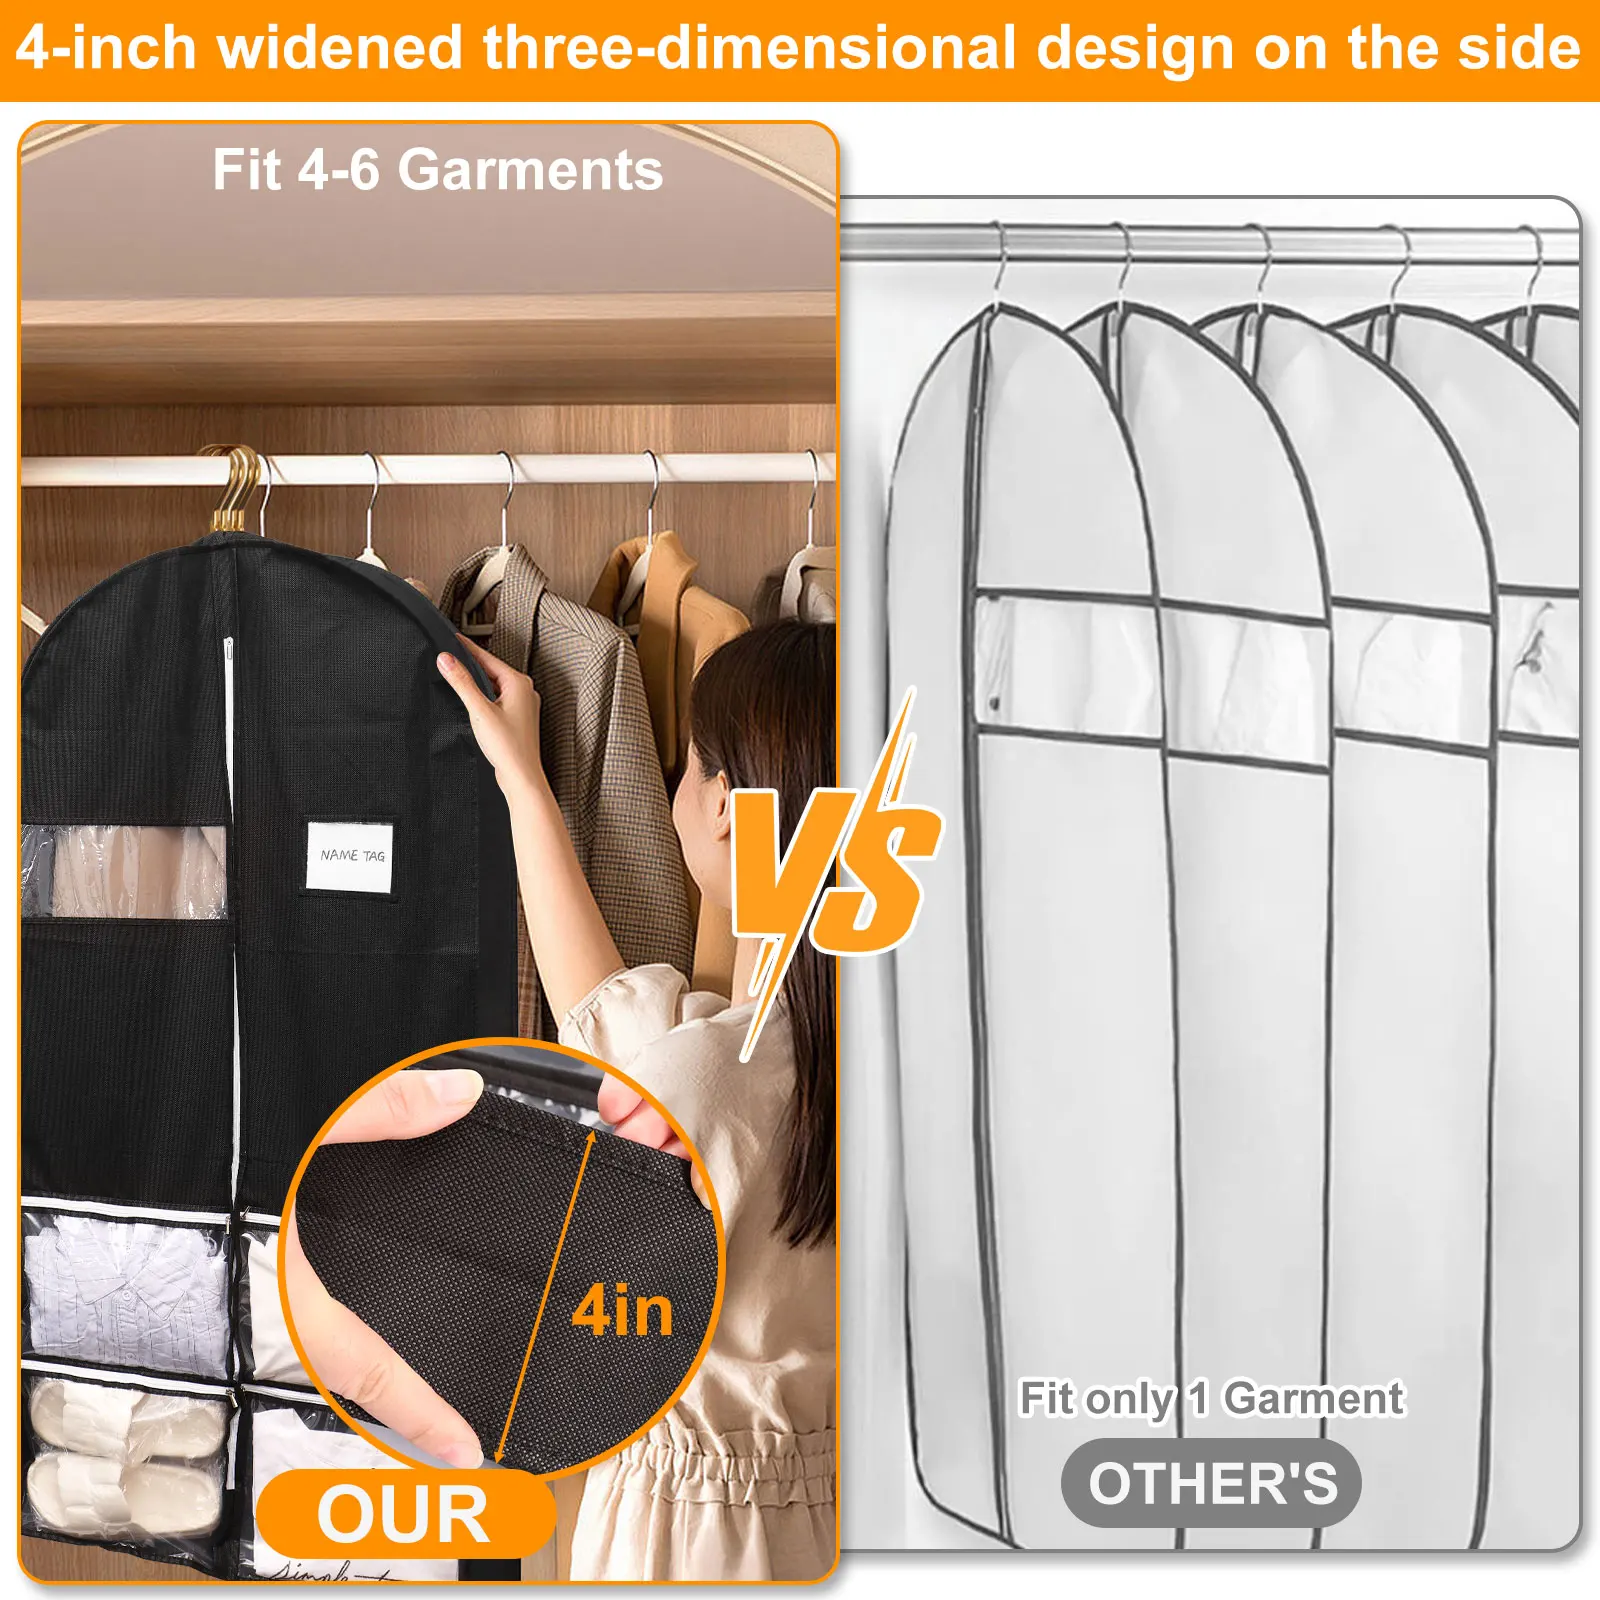 Hanging Clothes Bag Garment Bag Organizer Storage With Clear Pvc Windows  Garment Rack Cover Dust-proof Clothes Cover For Suit Coats Jackets Dress  Clos